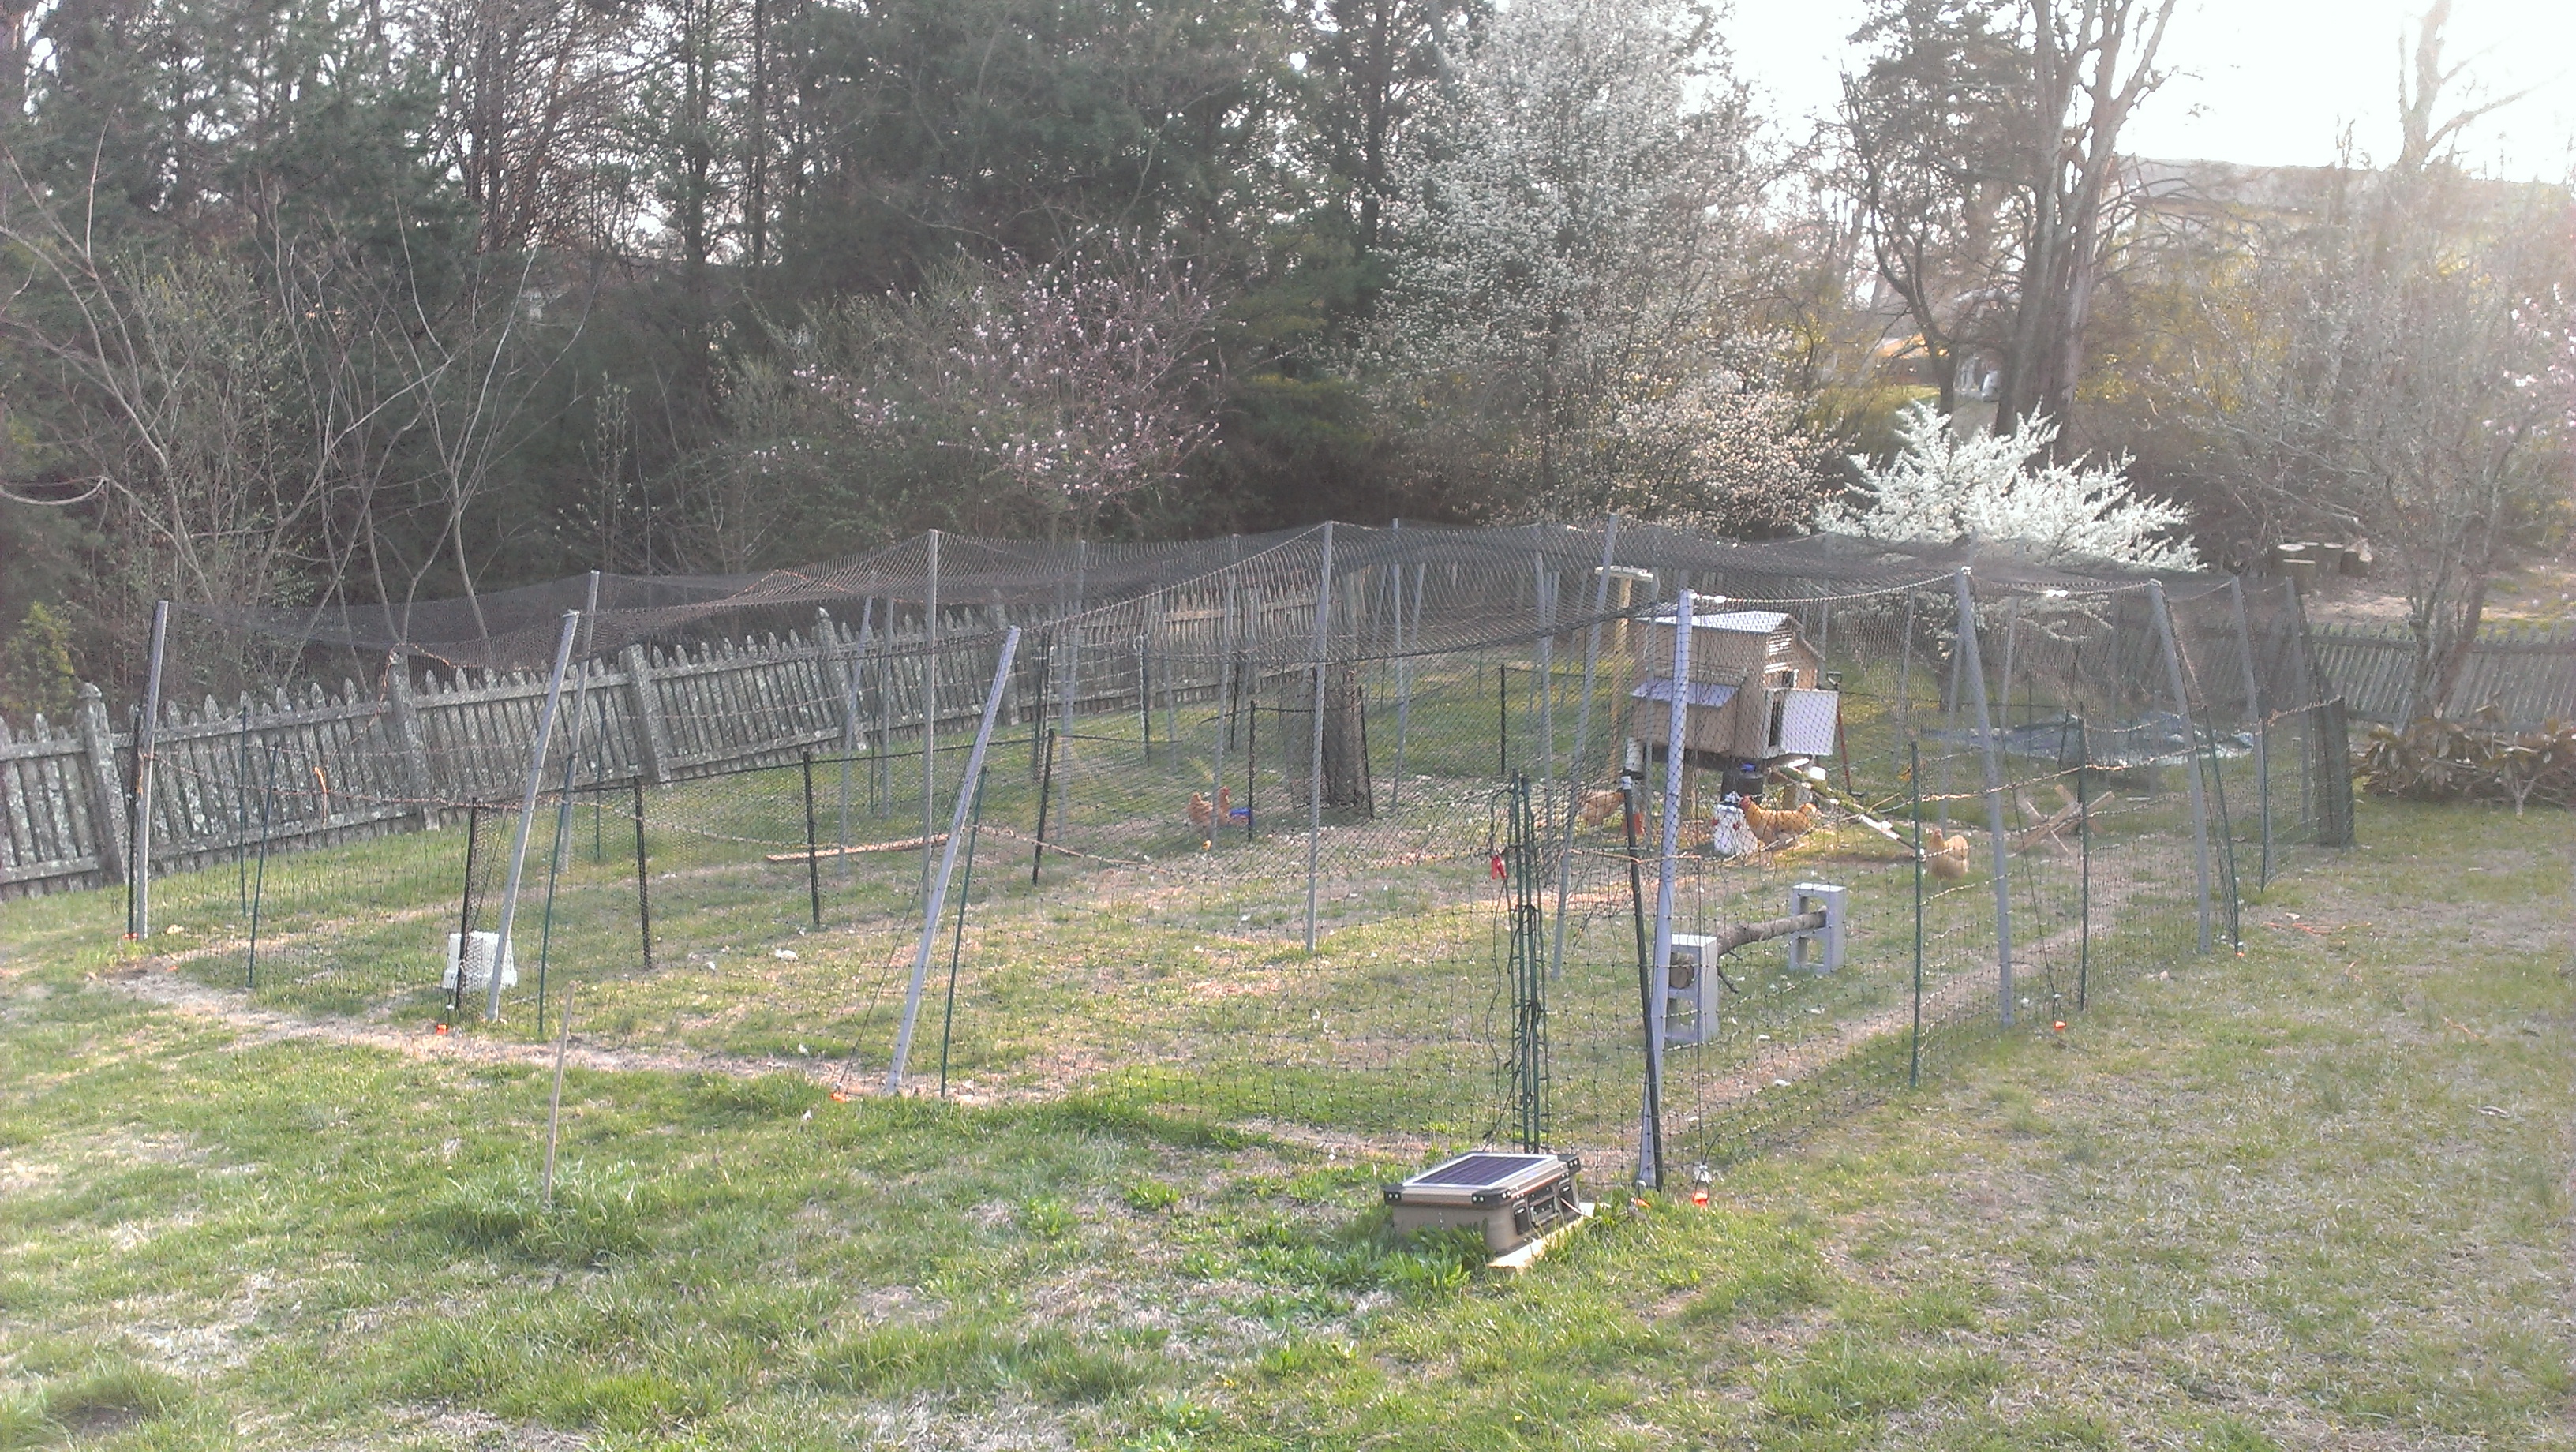 Overhead netting completed!  I dare a Cooper's Hawk to try to get  my babies now!